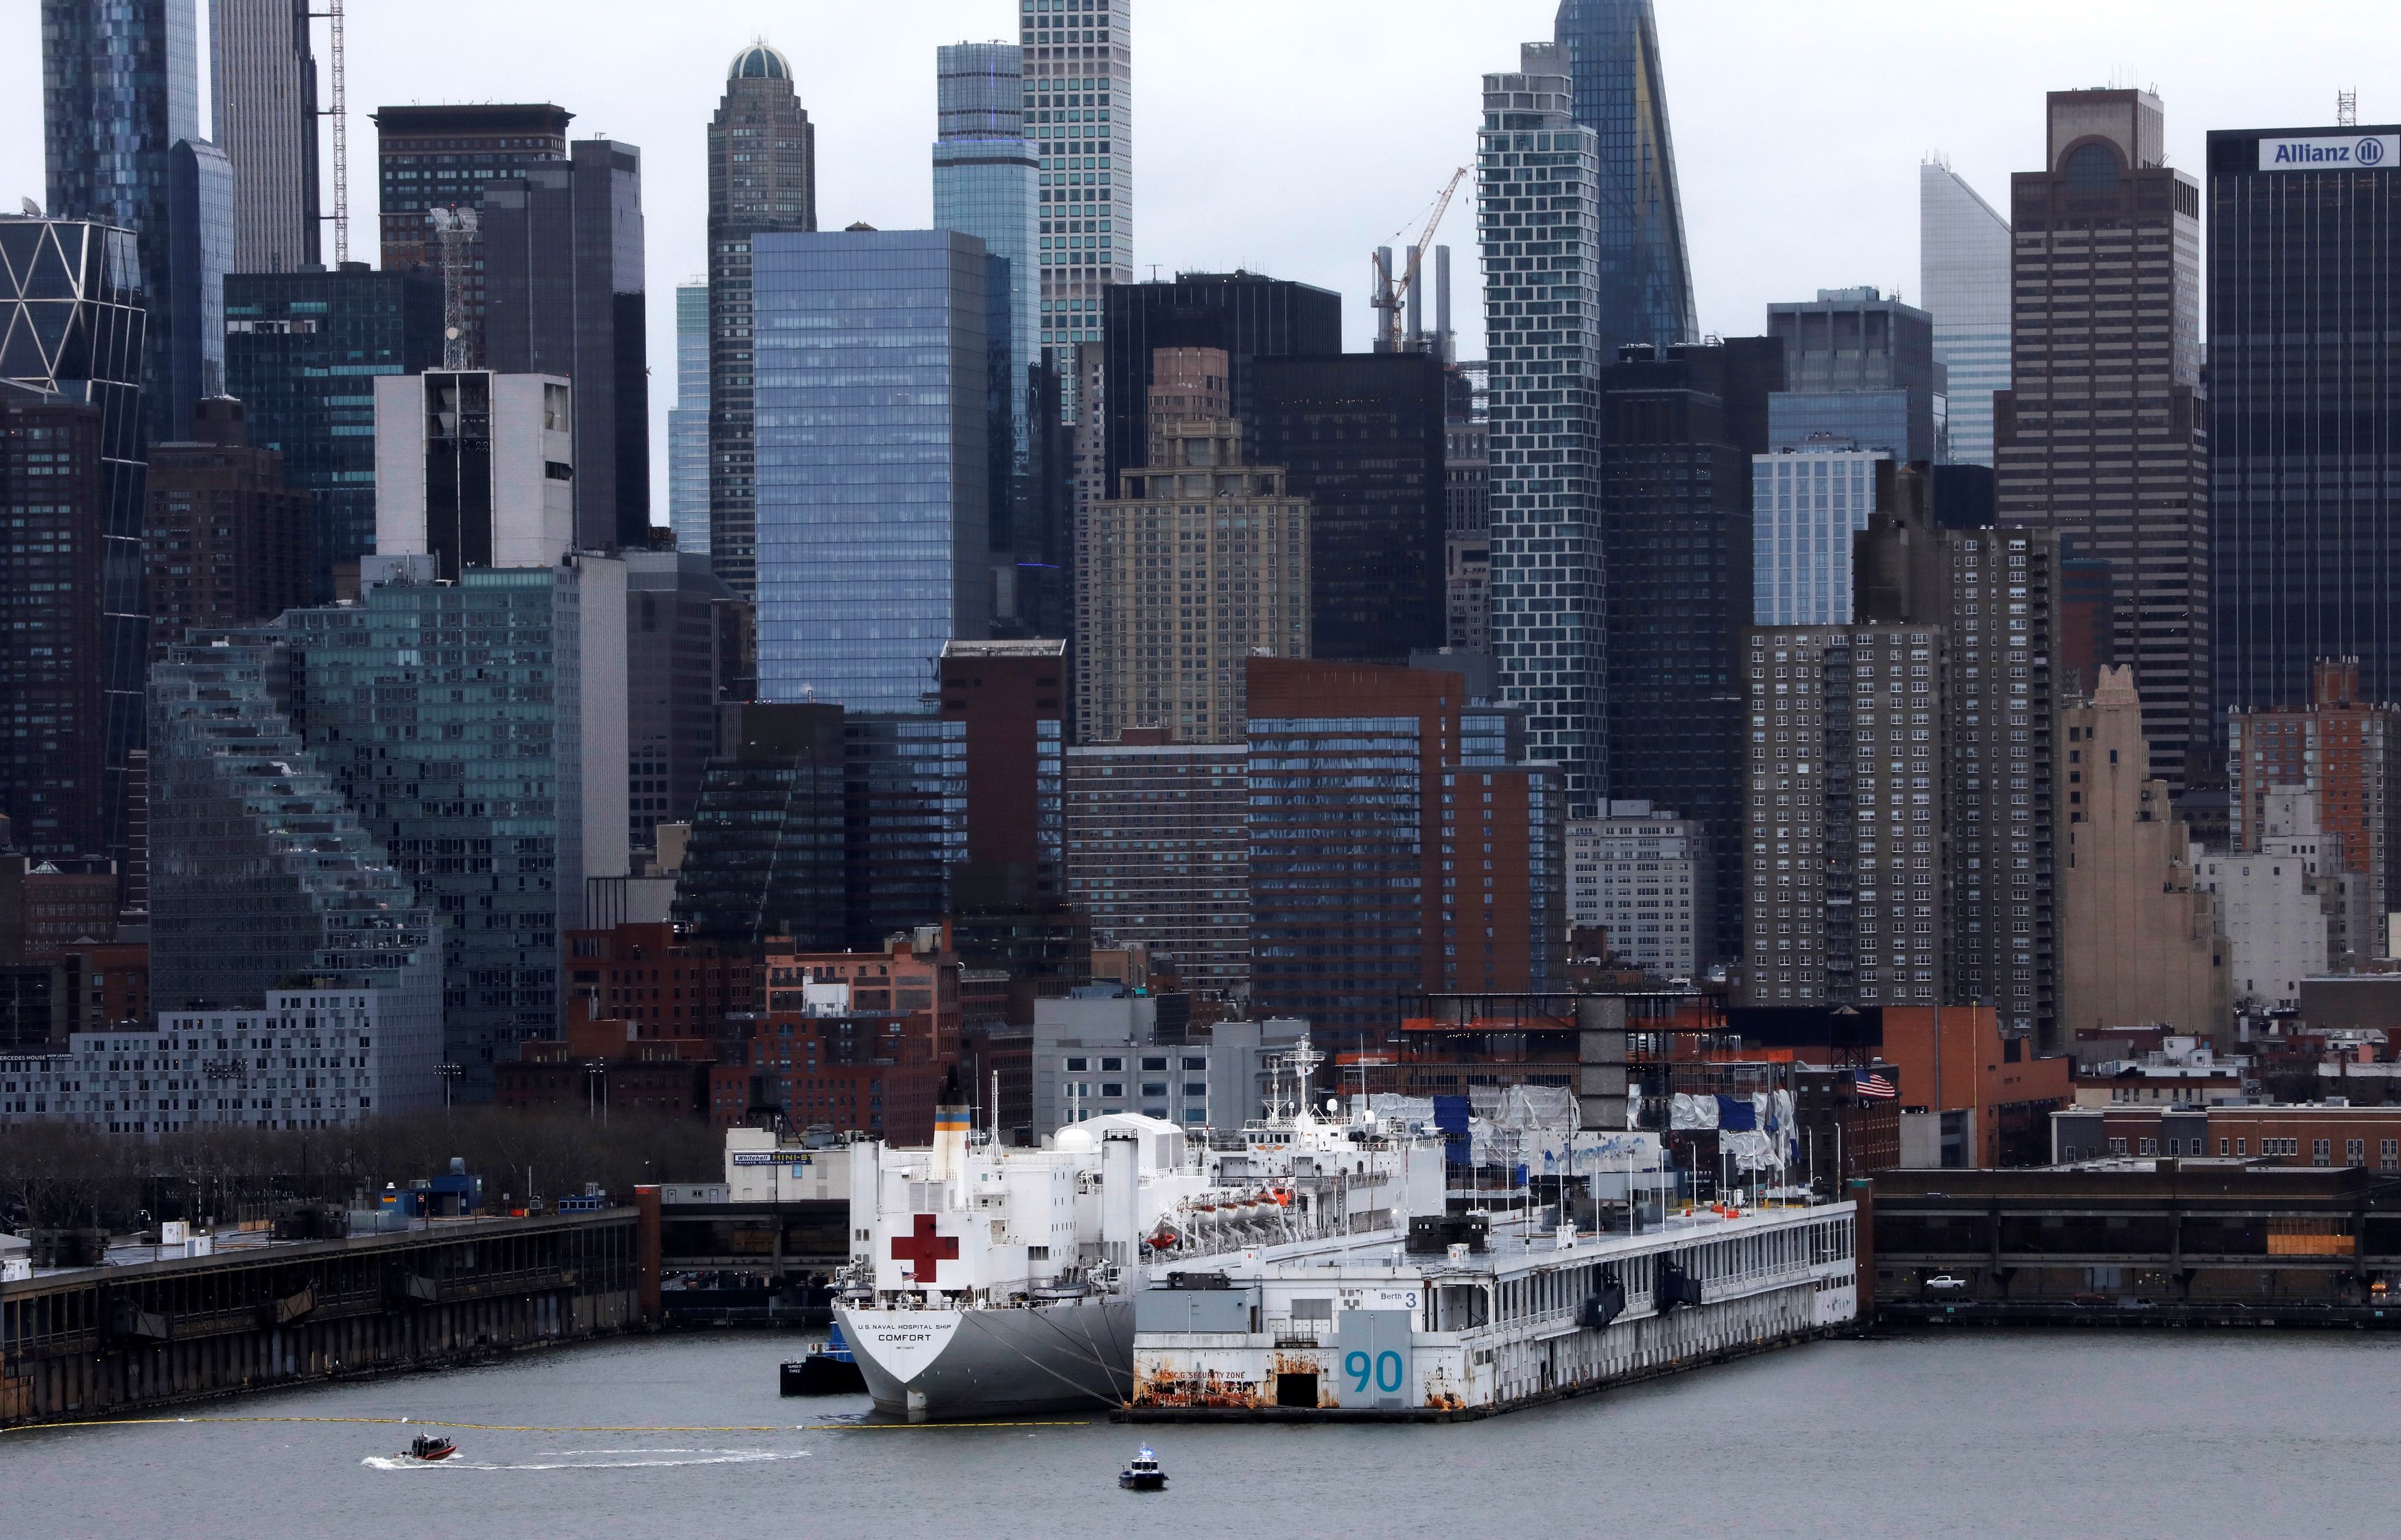 The USNS Comfort is seen docked at Pier 90 in Manhattan during the outbreak of the coronavirus disease (COVID-19) in New York